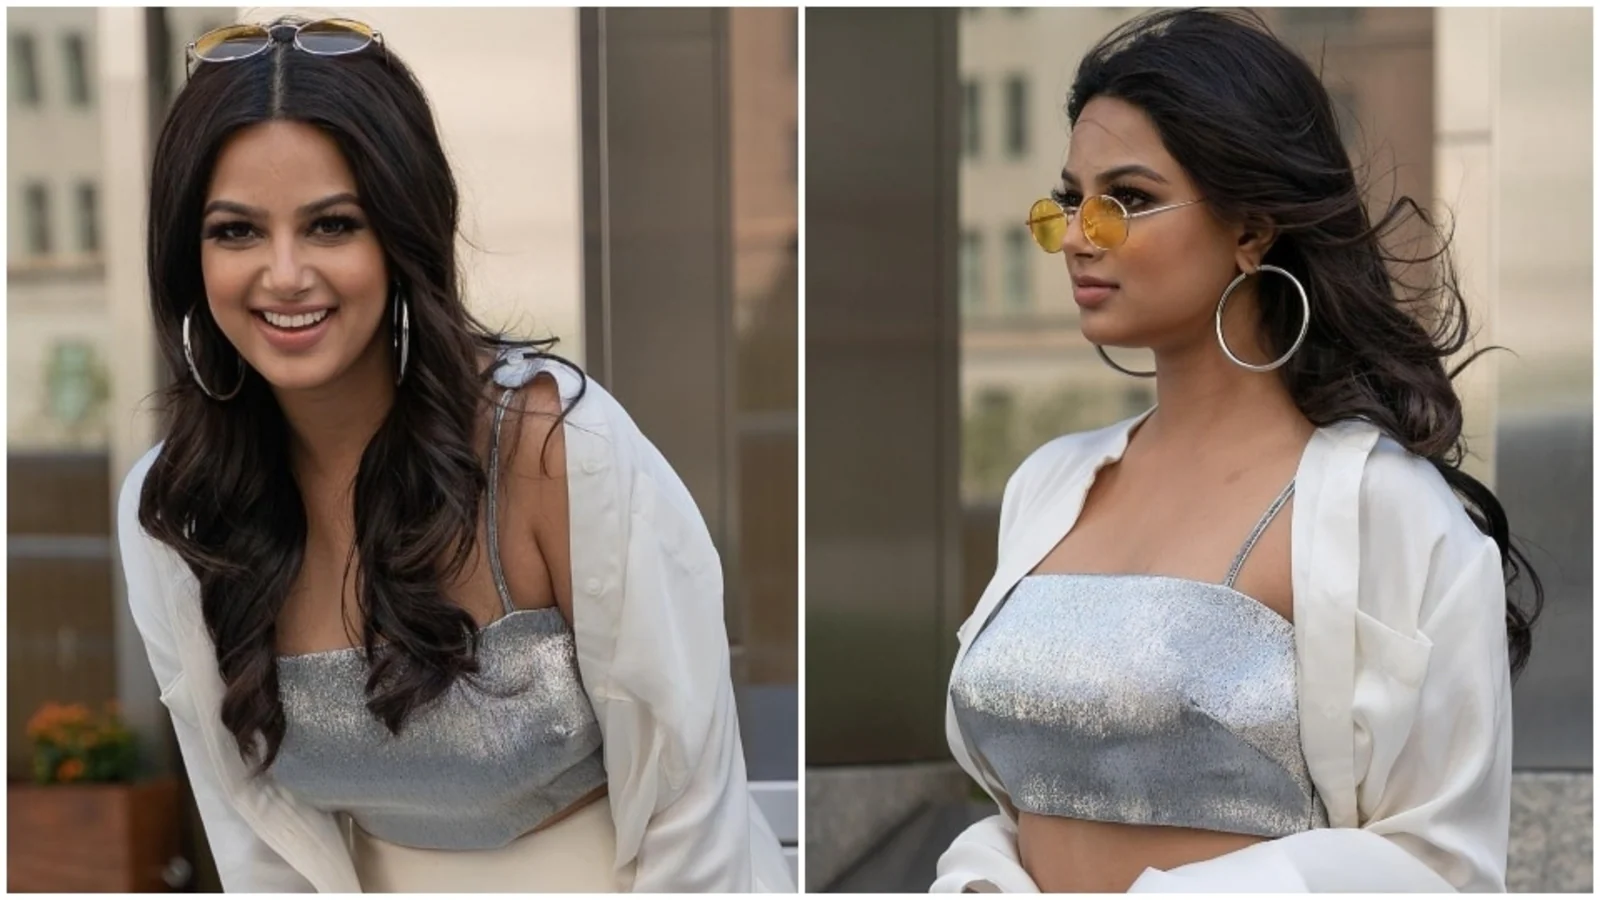 Harnnaz Sandhu is a glam ‘City girl’ in silver crop top with co-ord white shirt and pants set: Check out pics